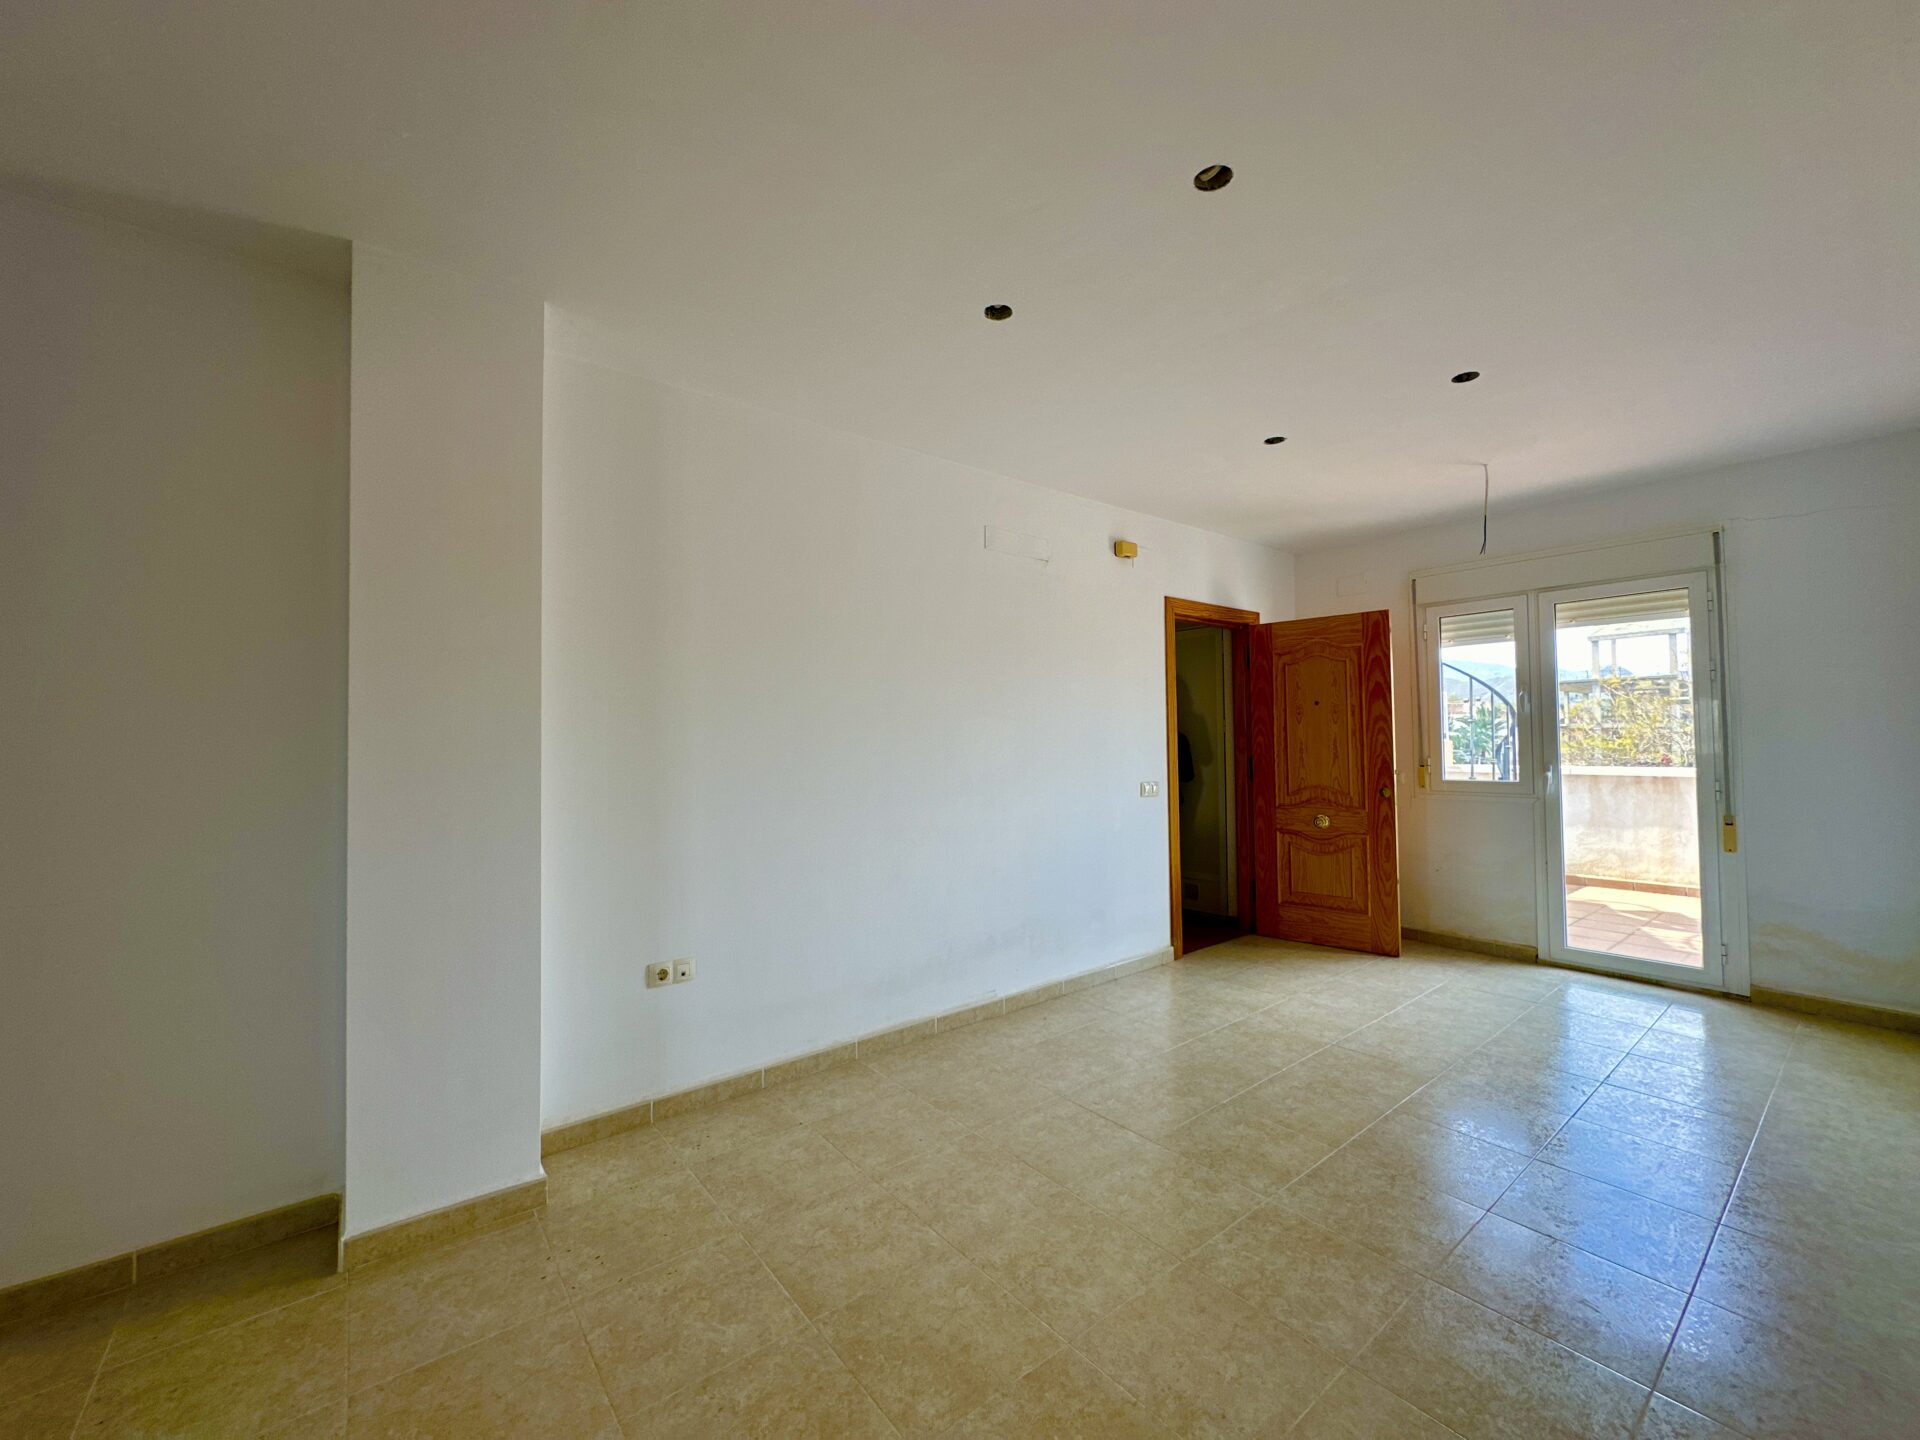 Penthouse for sale in Vera and surroundings 27